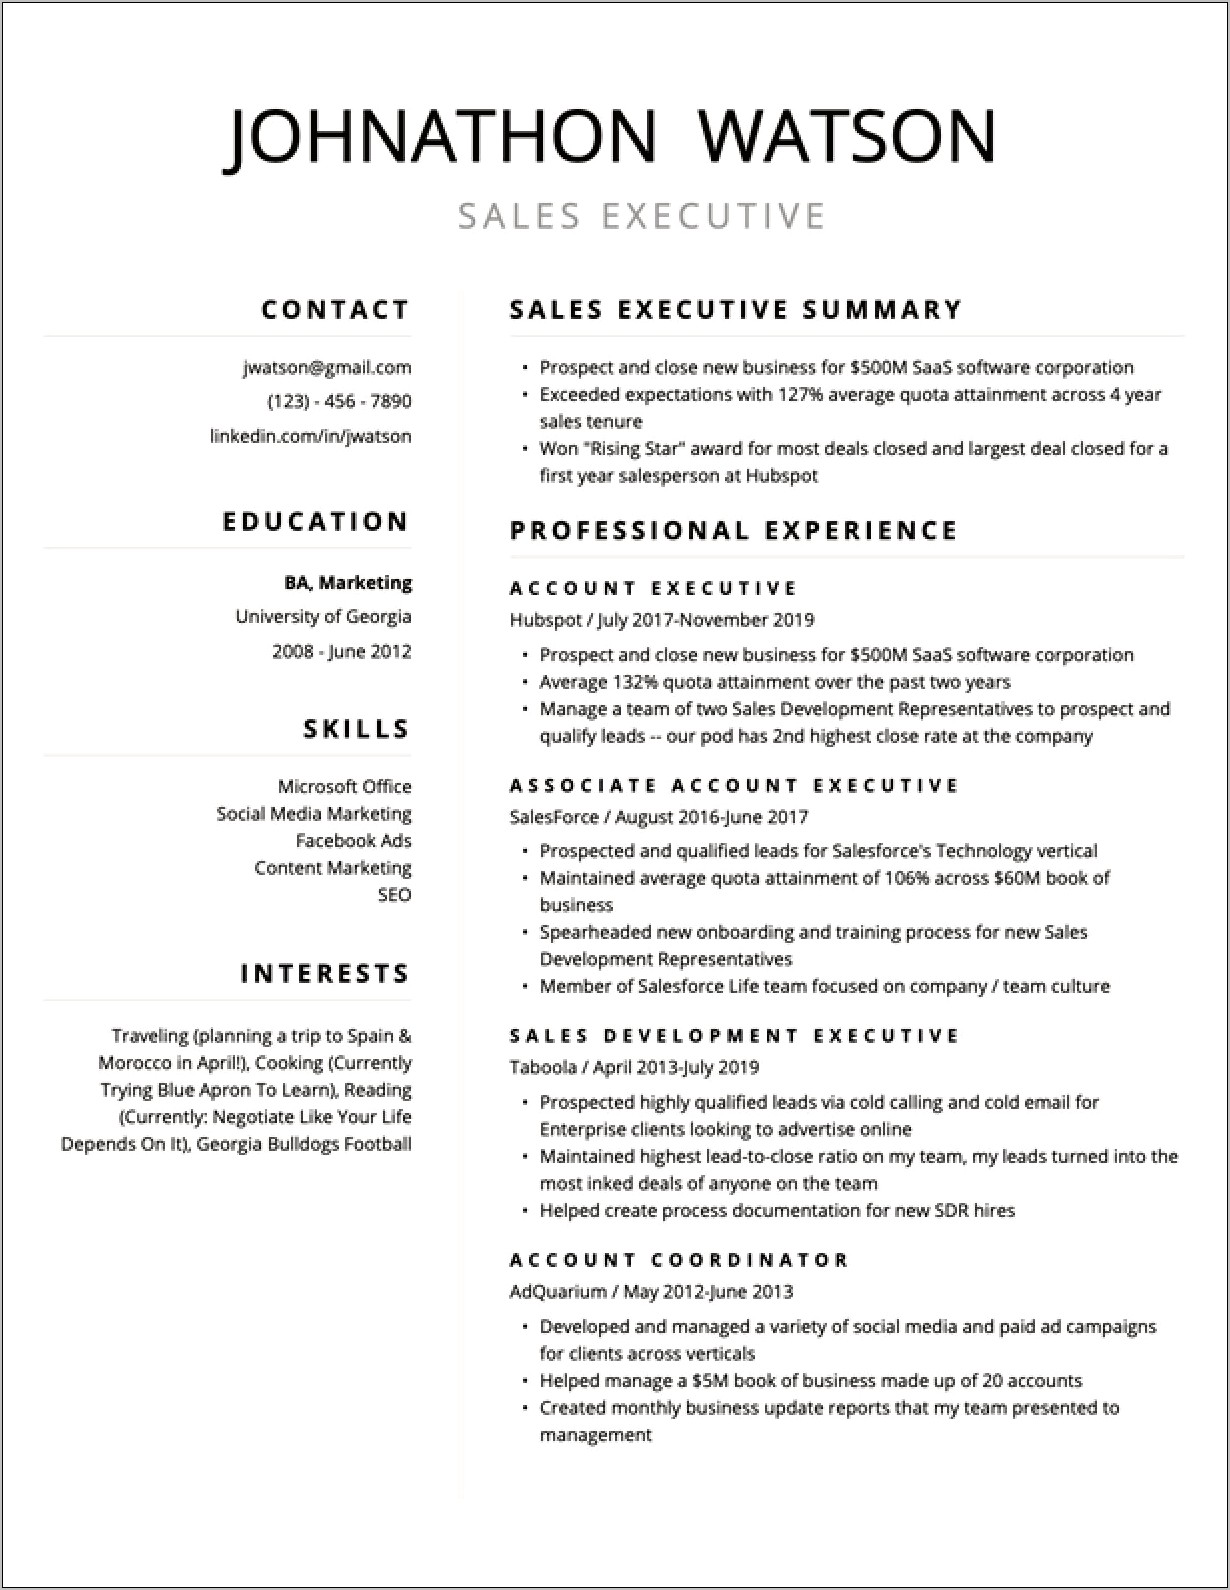 Resume And Power Button Not Working